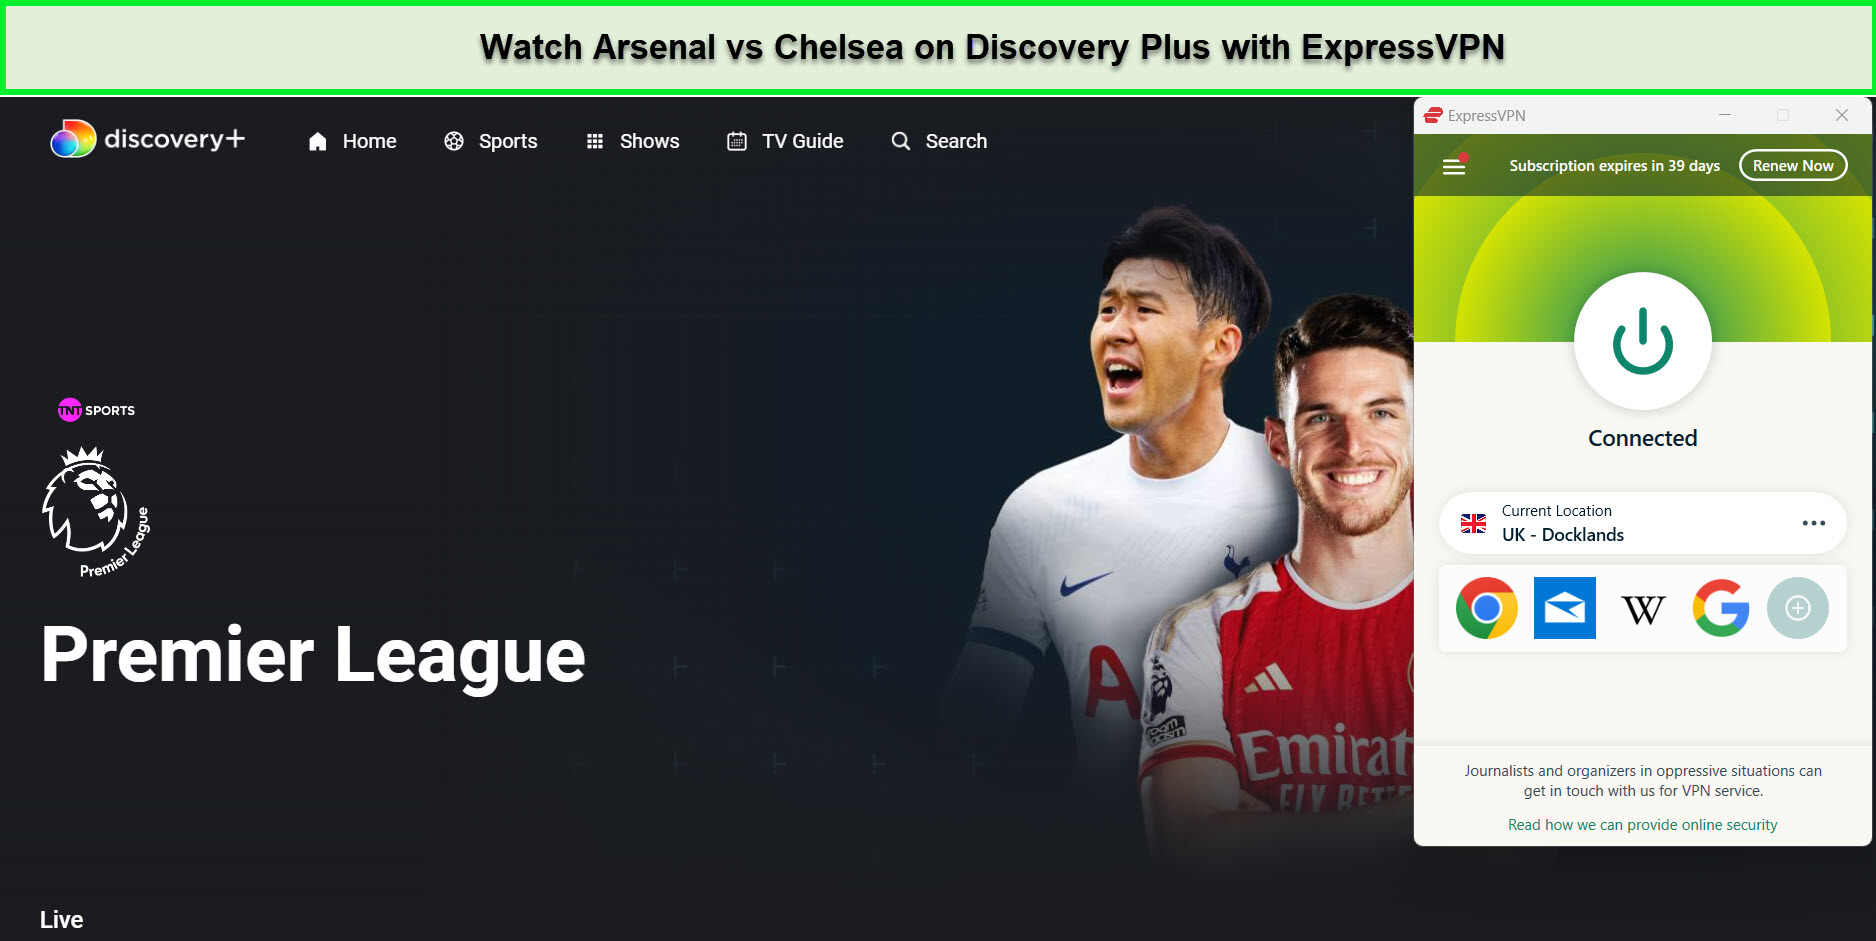 Watch-Arsenal-vs-Chelsea-in-Singapore-on-Discovery-Plus-with-ExpressVPN